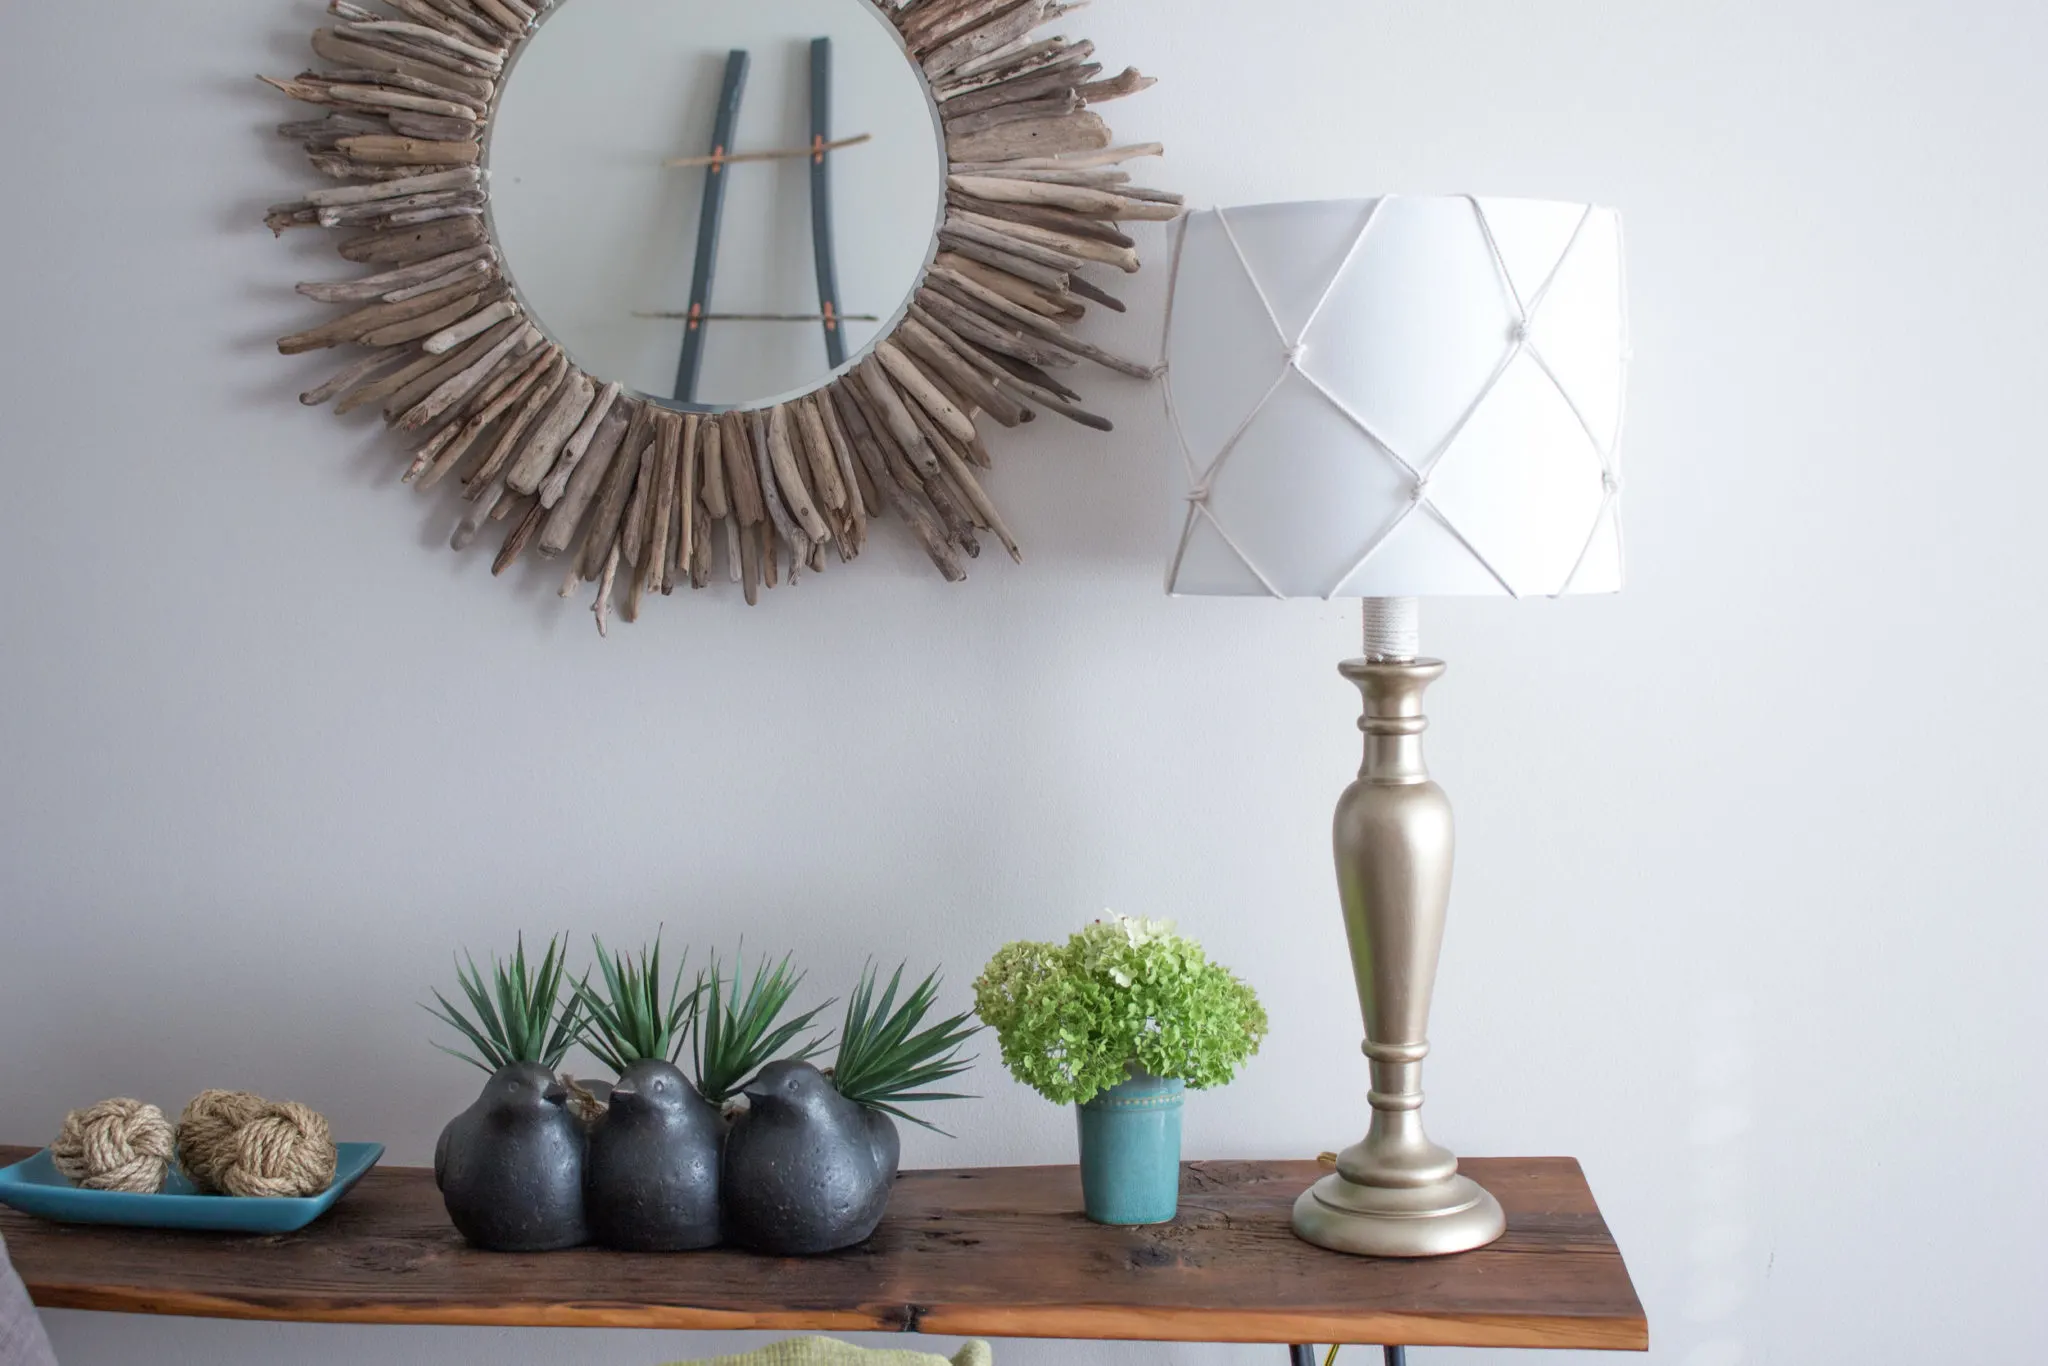 An outdated old table lamp for the living room got a fresh nautical makeover using DecoArt Americana Metallic Paint and a simple DIY fish net lampshade.